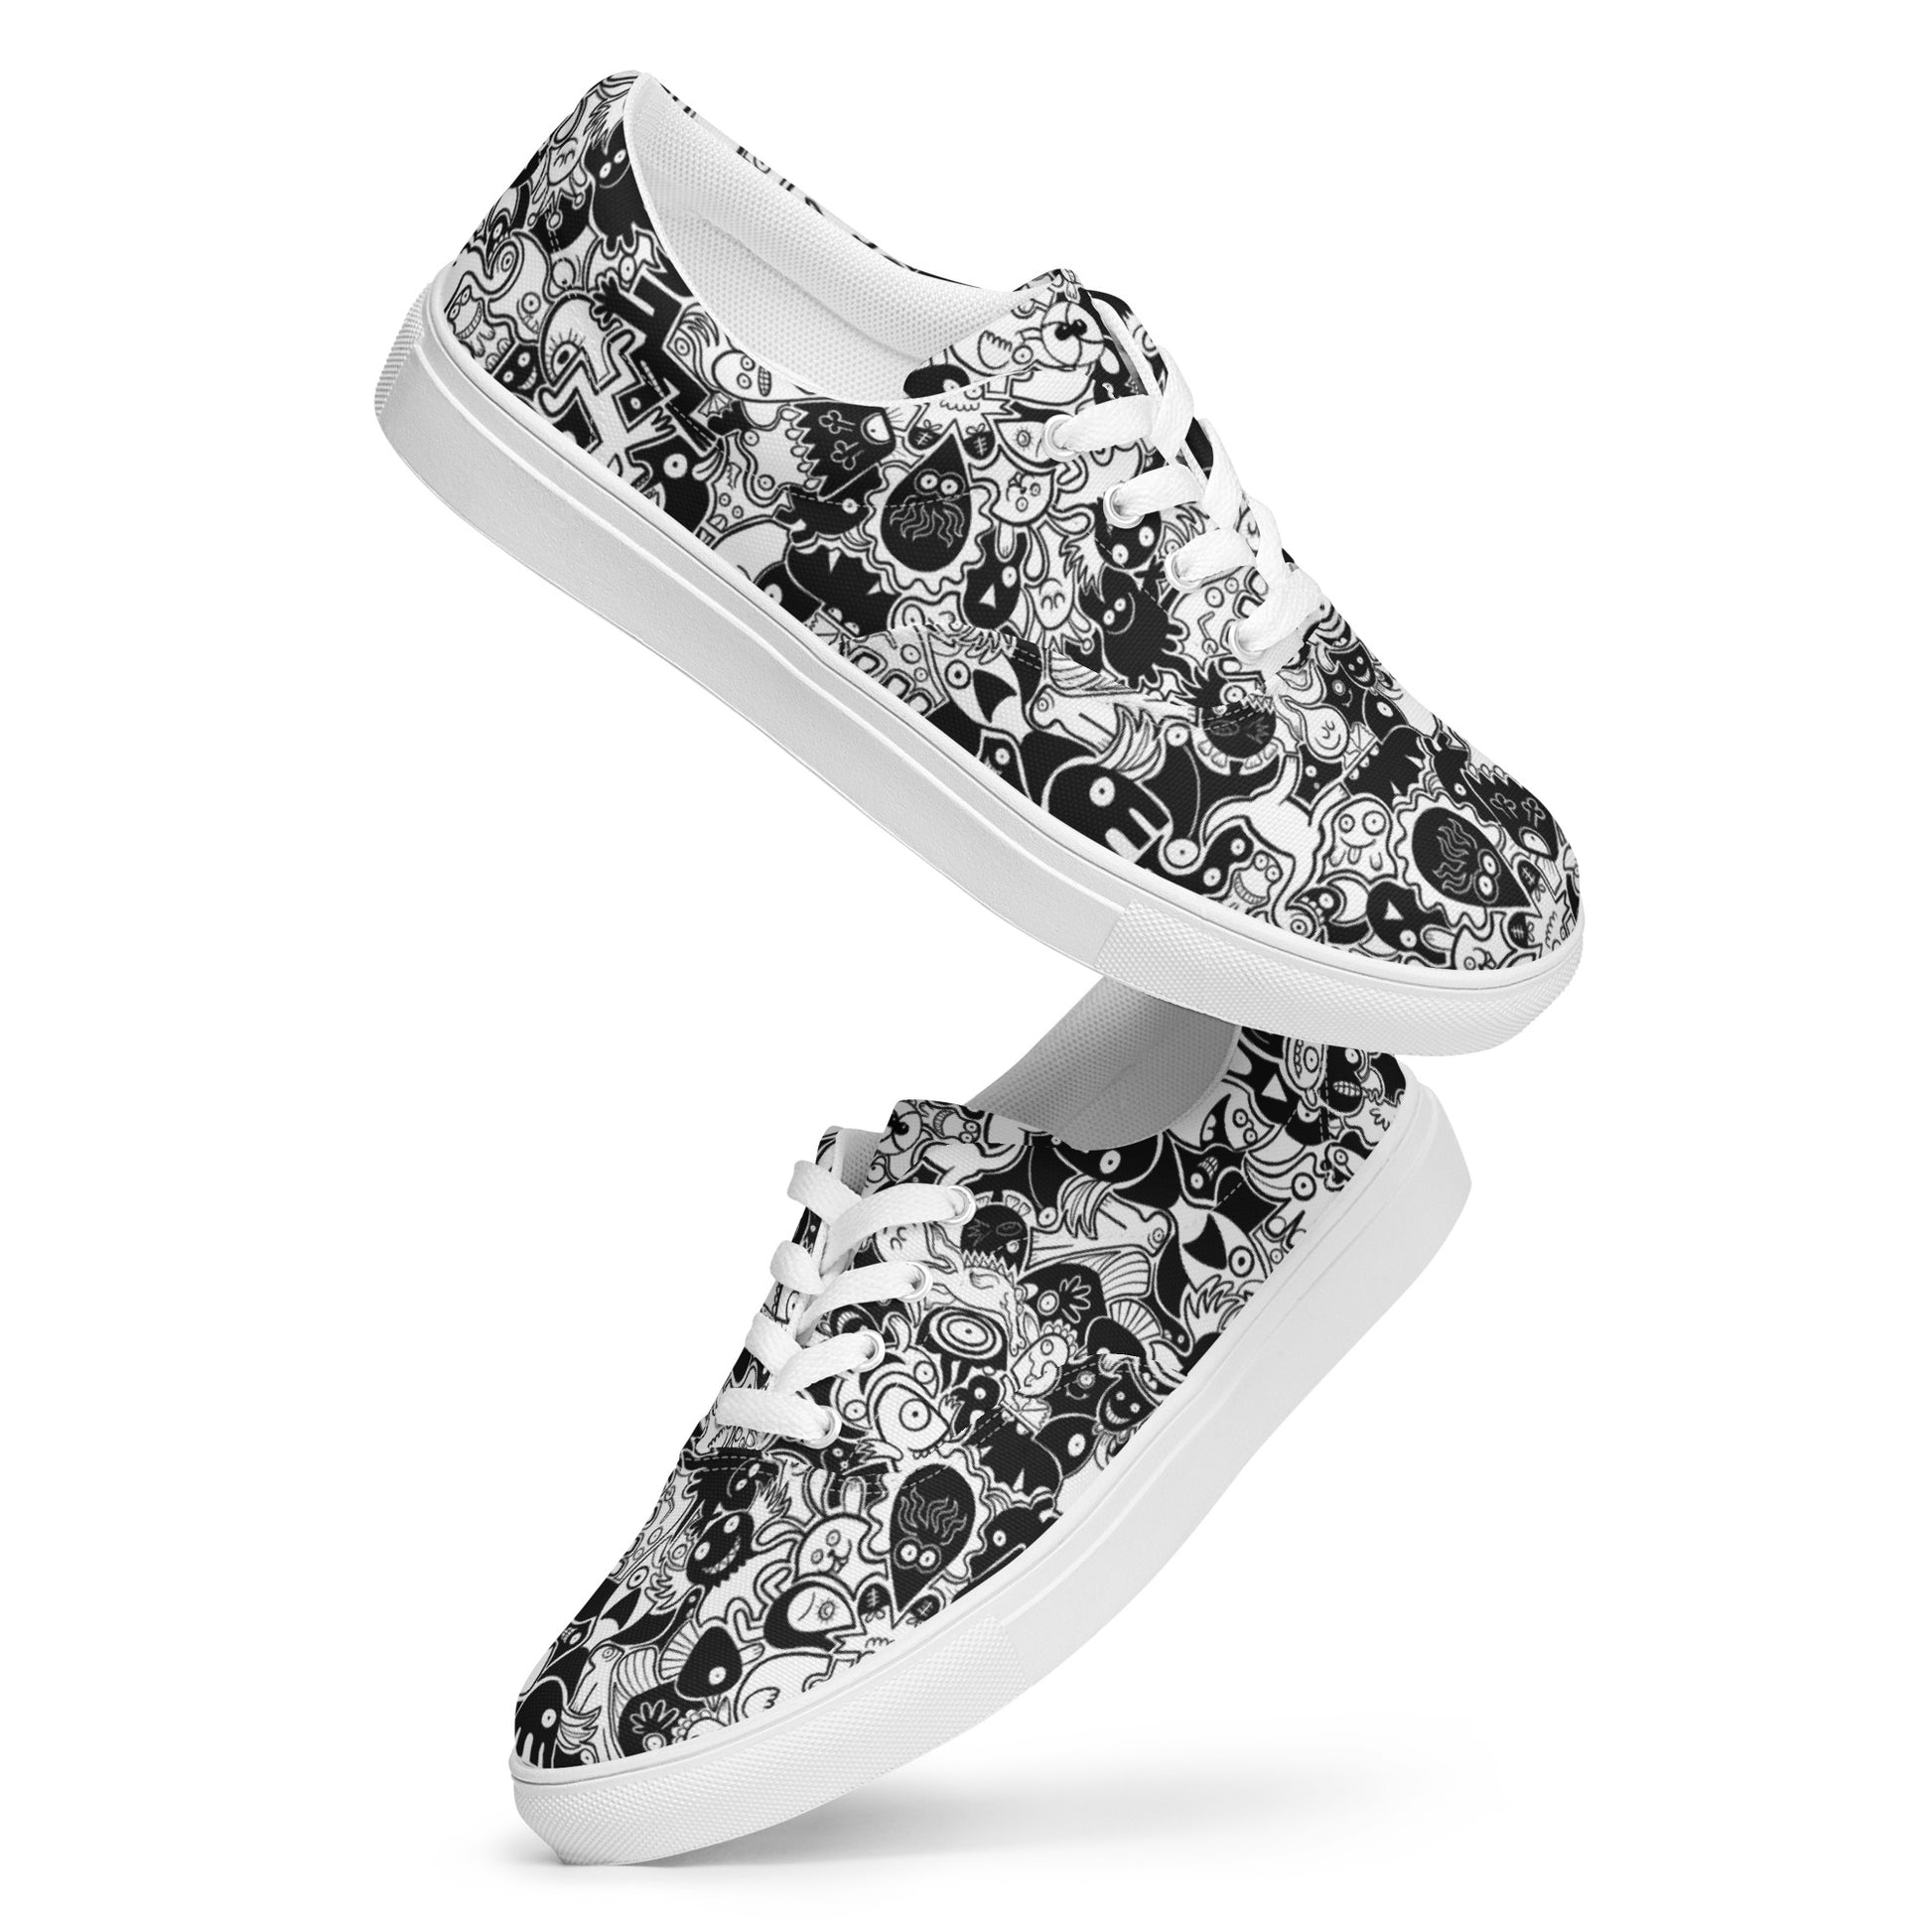 Joyful crowd of black and white doodle creatures Men’s lace-up canvas shoes. Playing with shoes